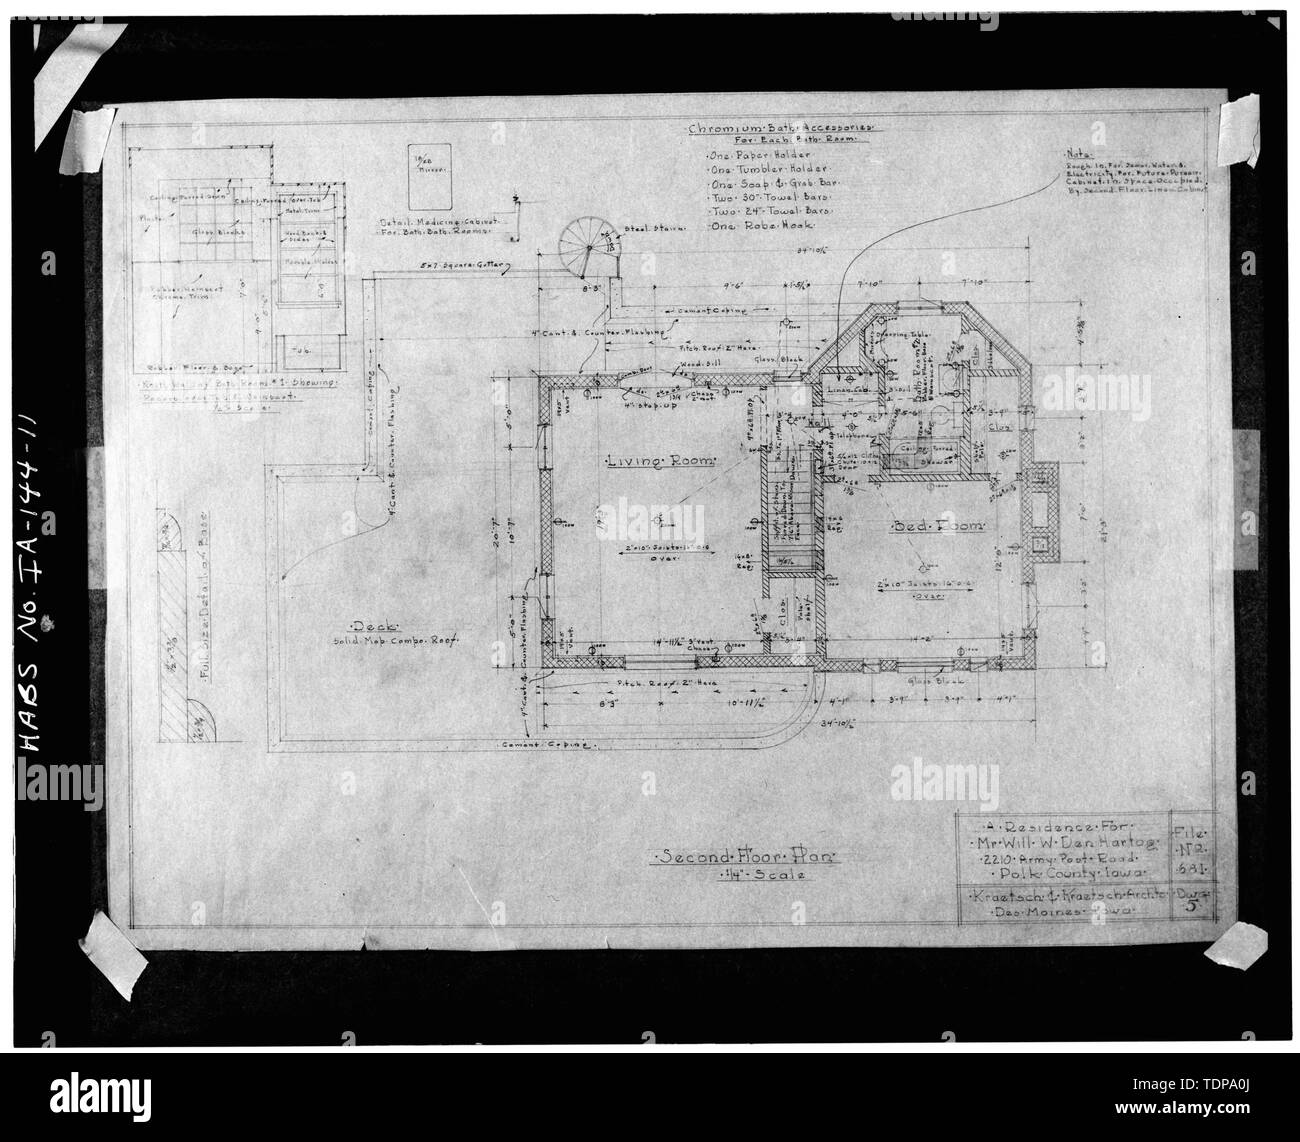 Photocopy Of Construction Drawings March 1940 View Of Second